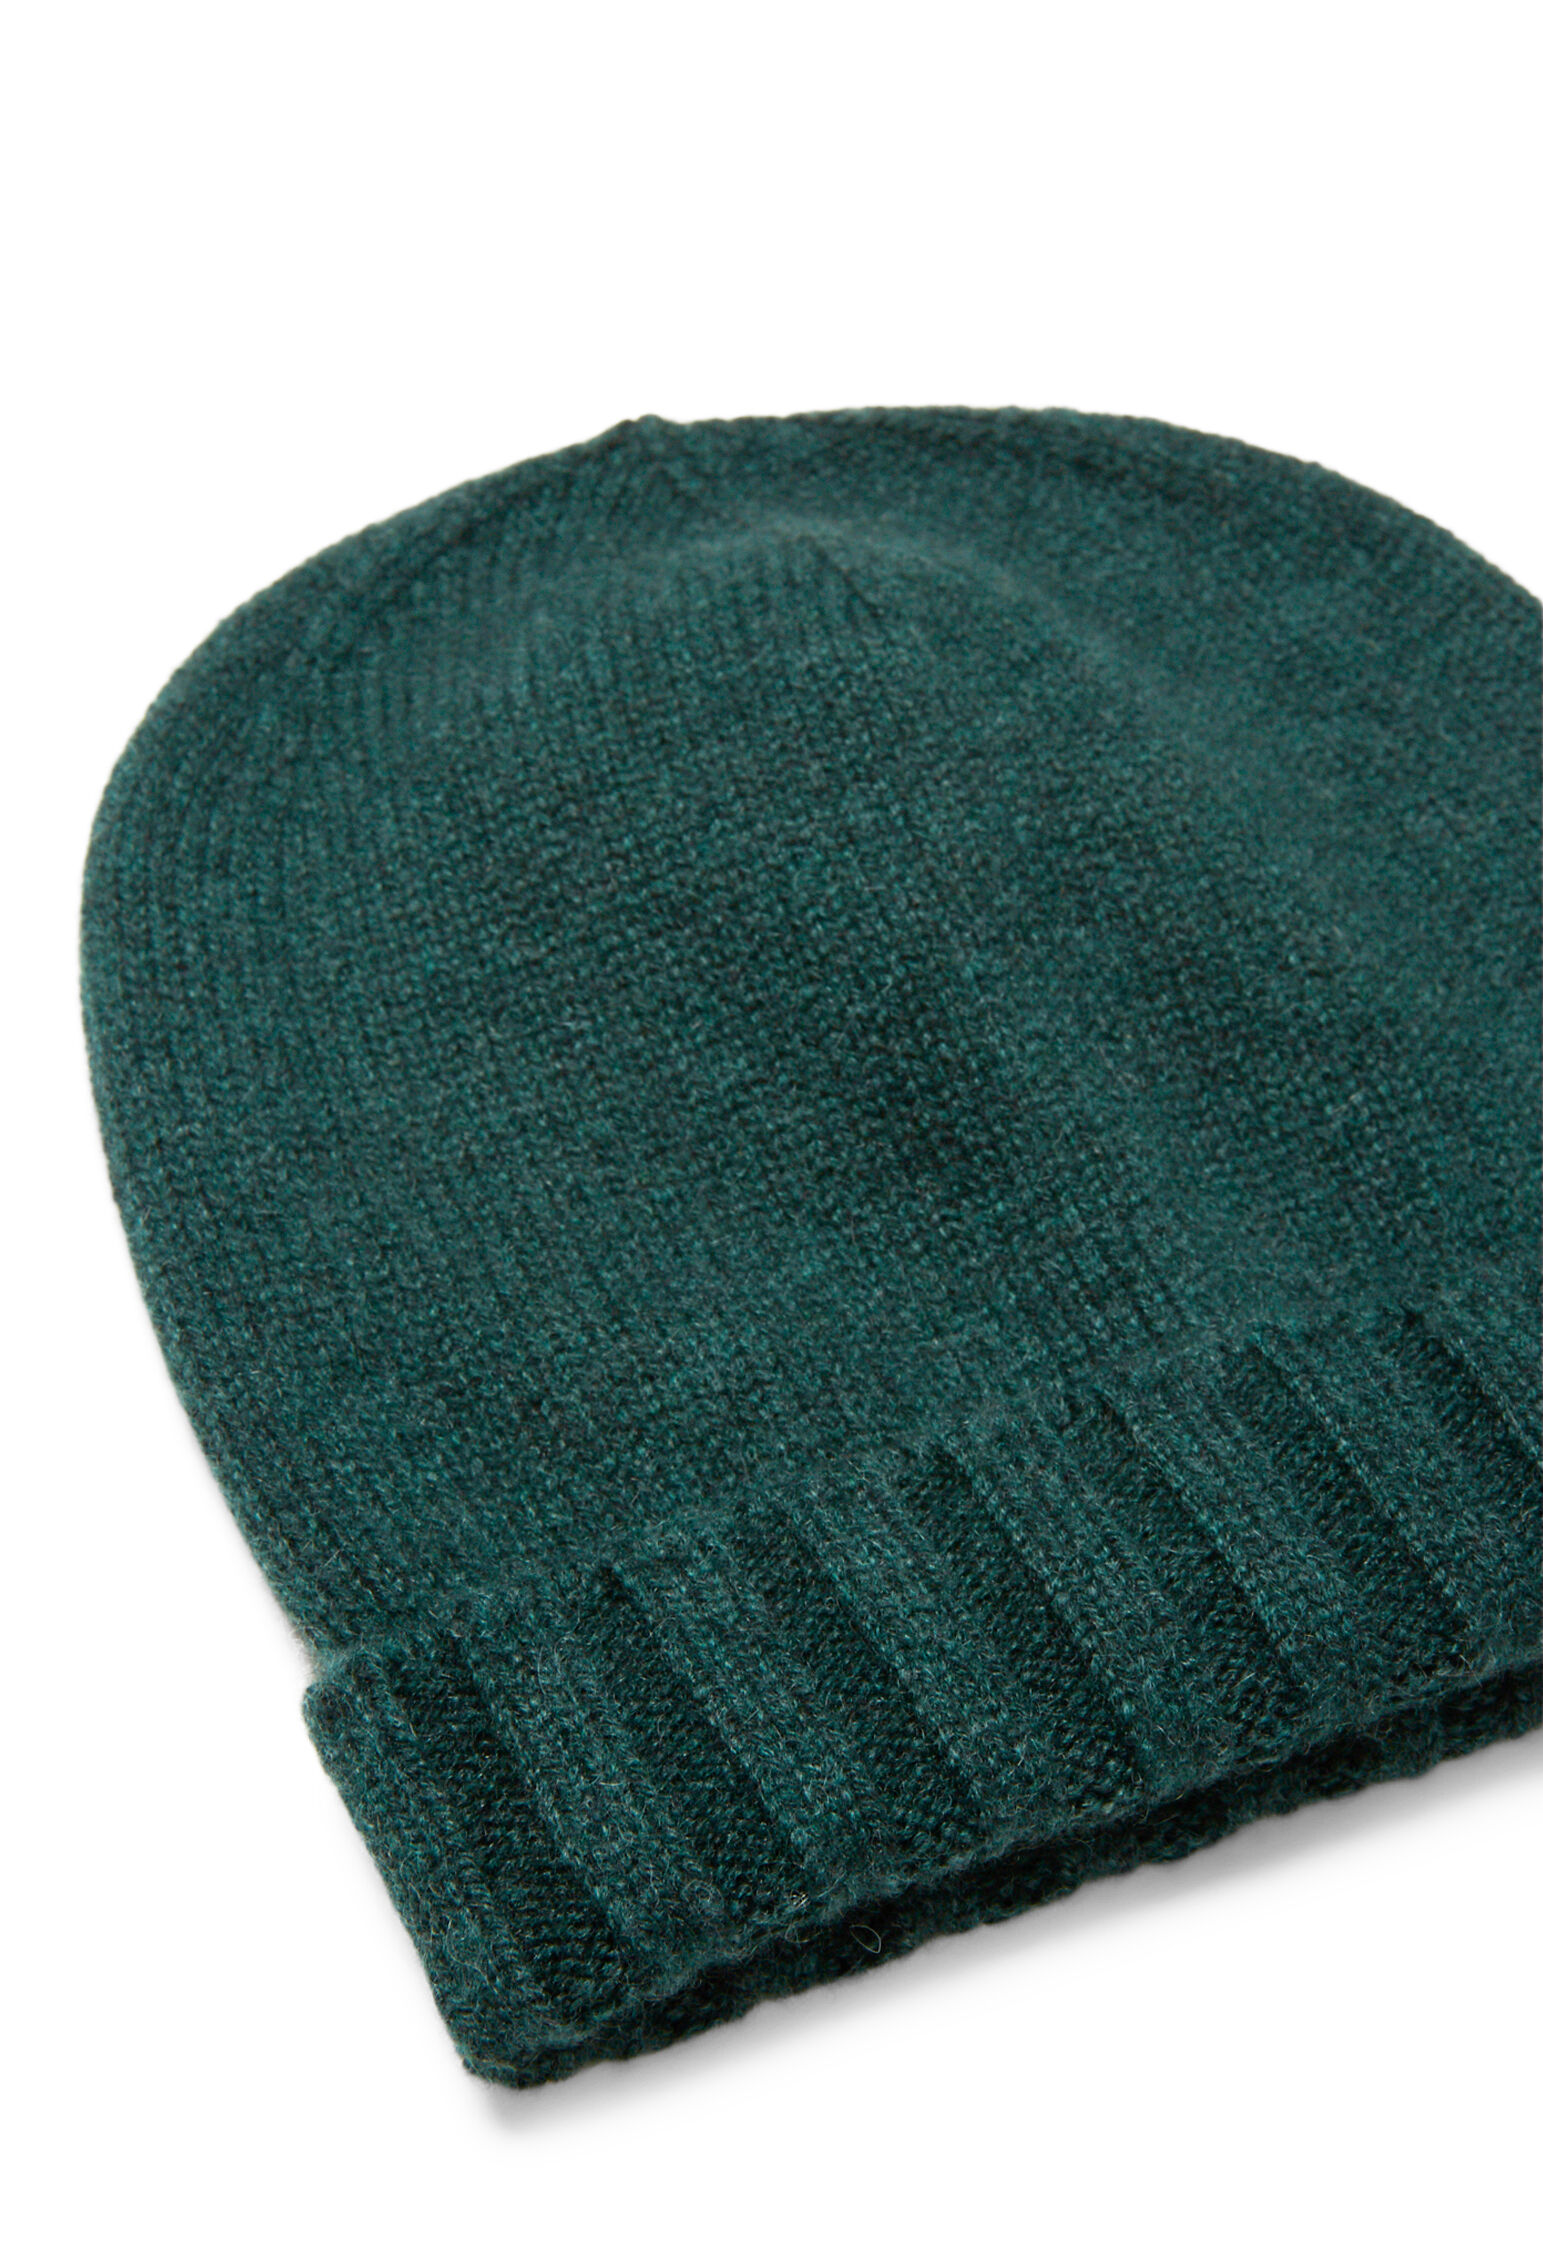 Pure cashmere knit beanie in Green: Luxury Italian Accessories